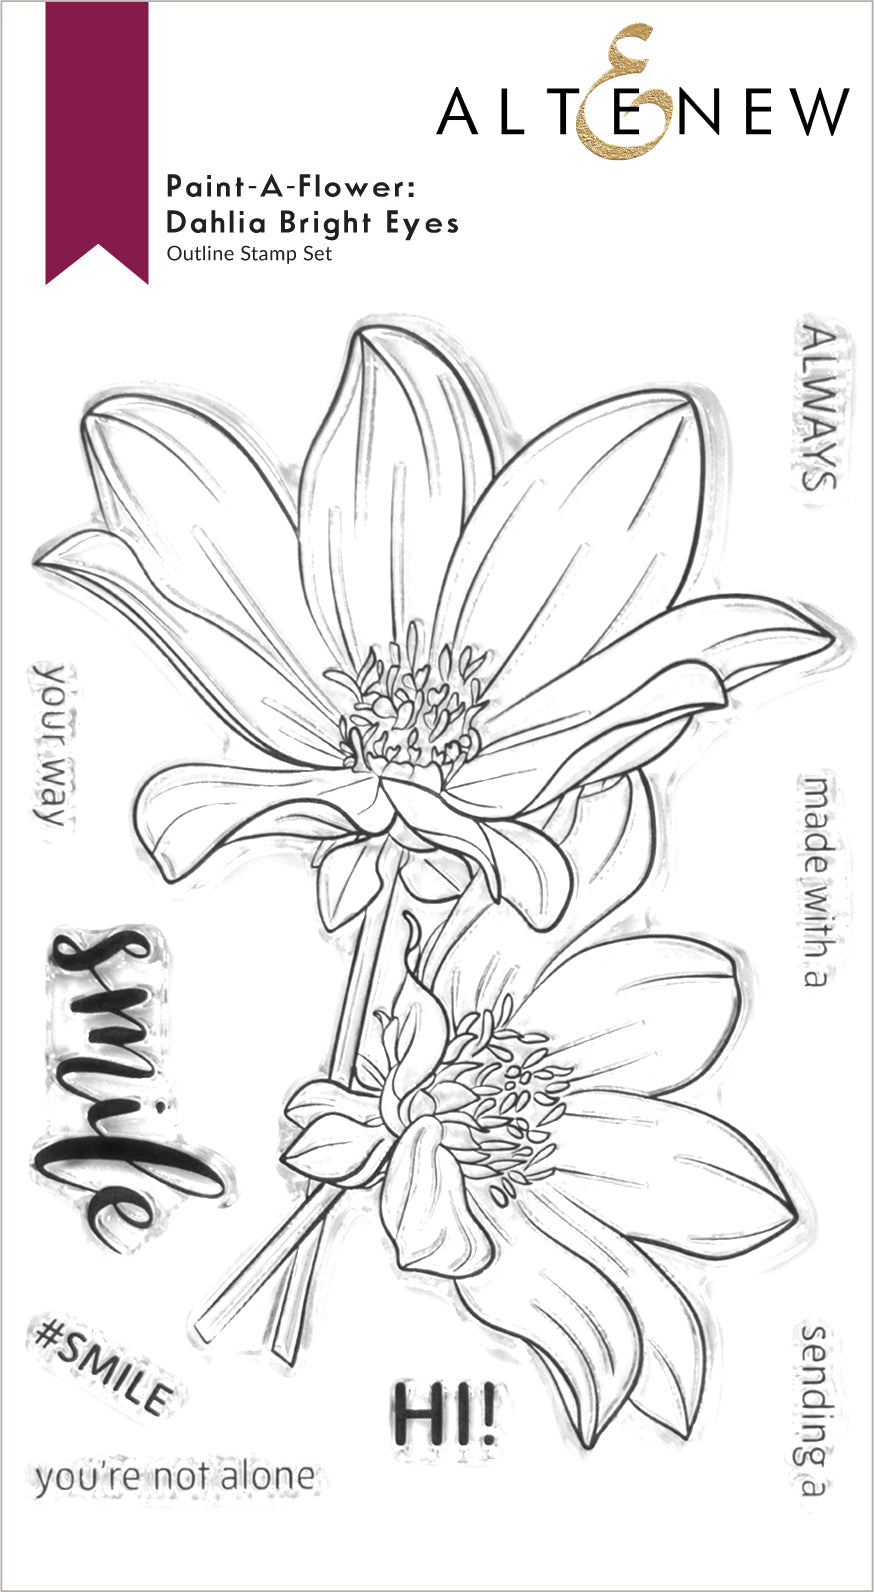 Altenew - Clear Stamps - Paint-A-Flower: Dahlia Bright Eyes Outline